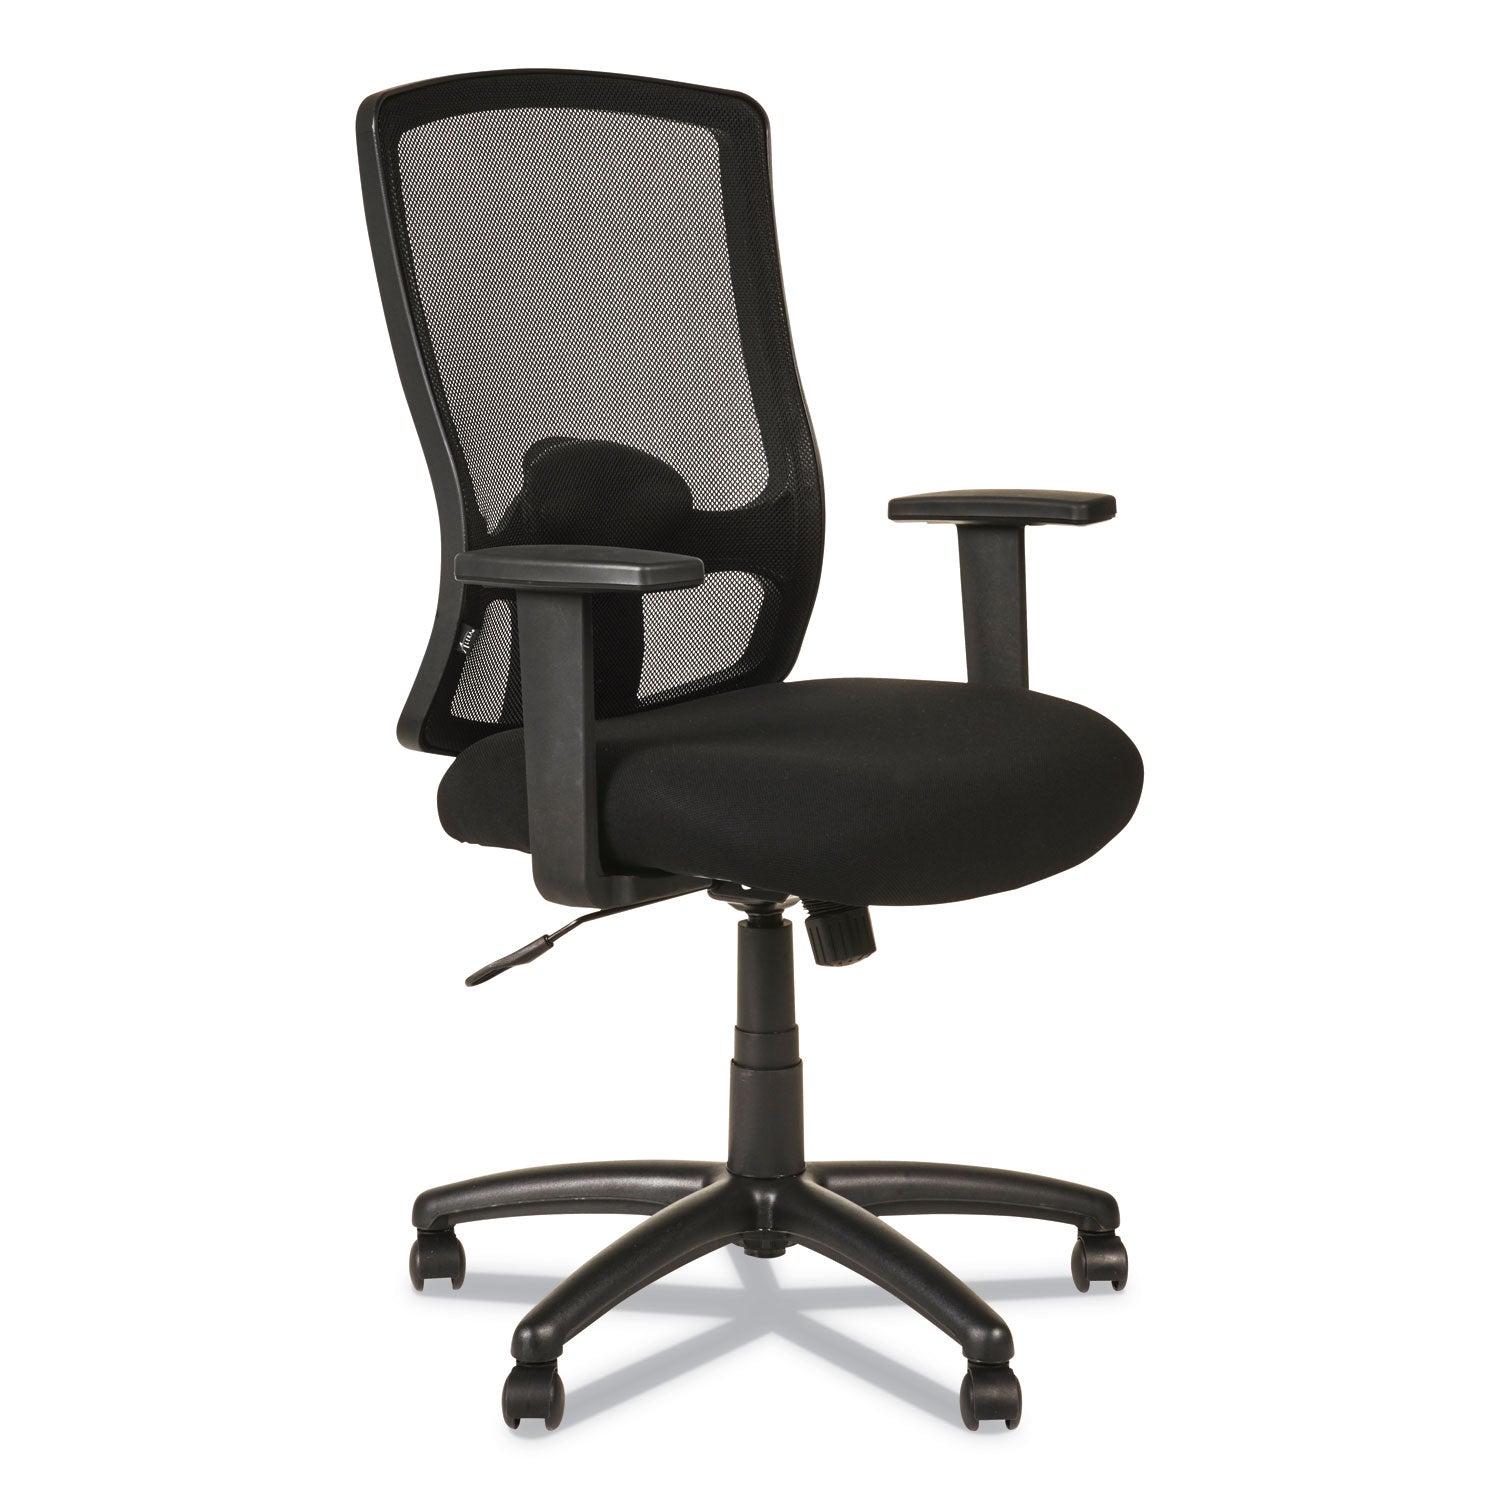 alera-etros-series-high-back-swivel-tilt-chair-supports-up-to-275-lb-1811-to-2204-seat-height-black_aleet4117b - 1